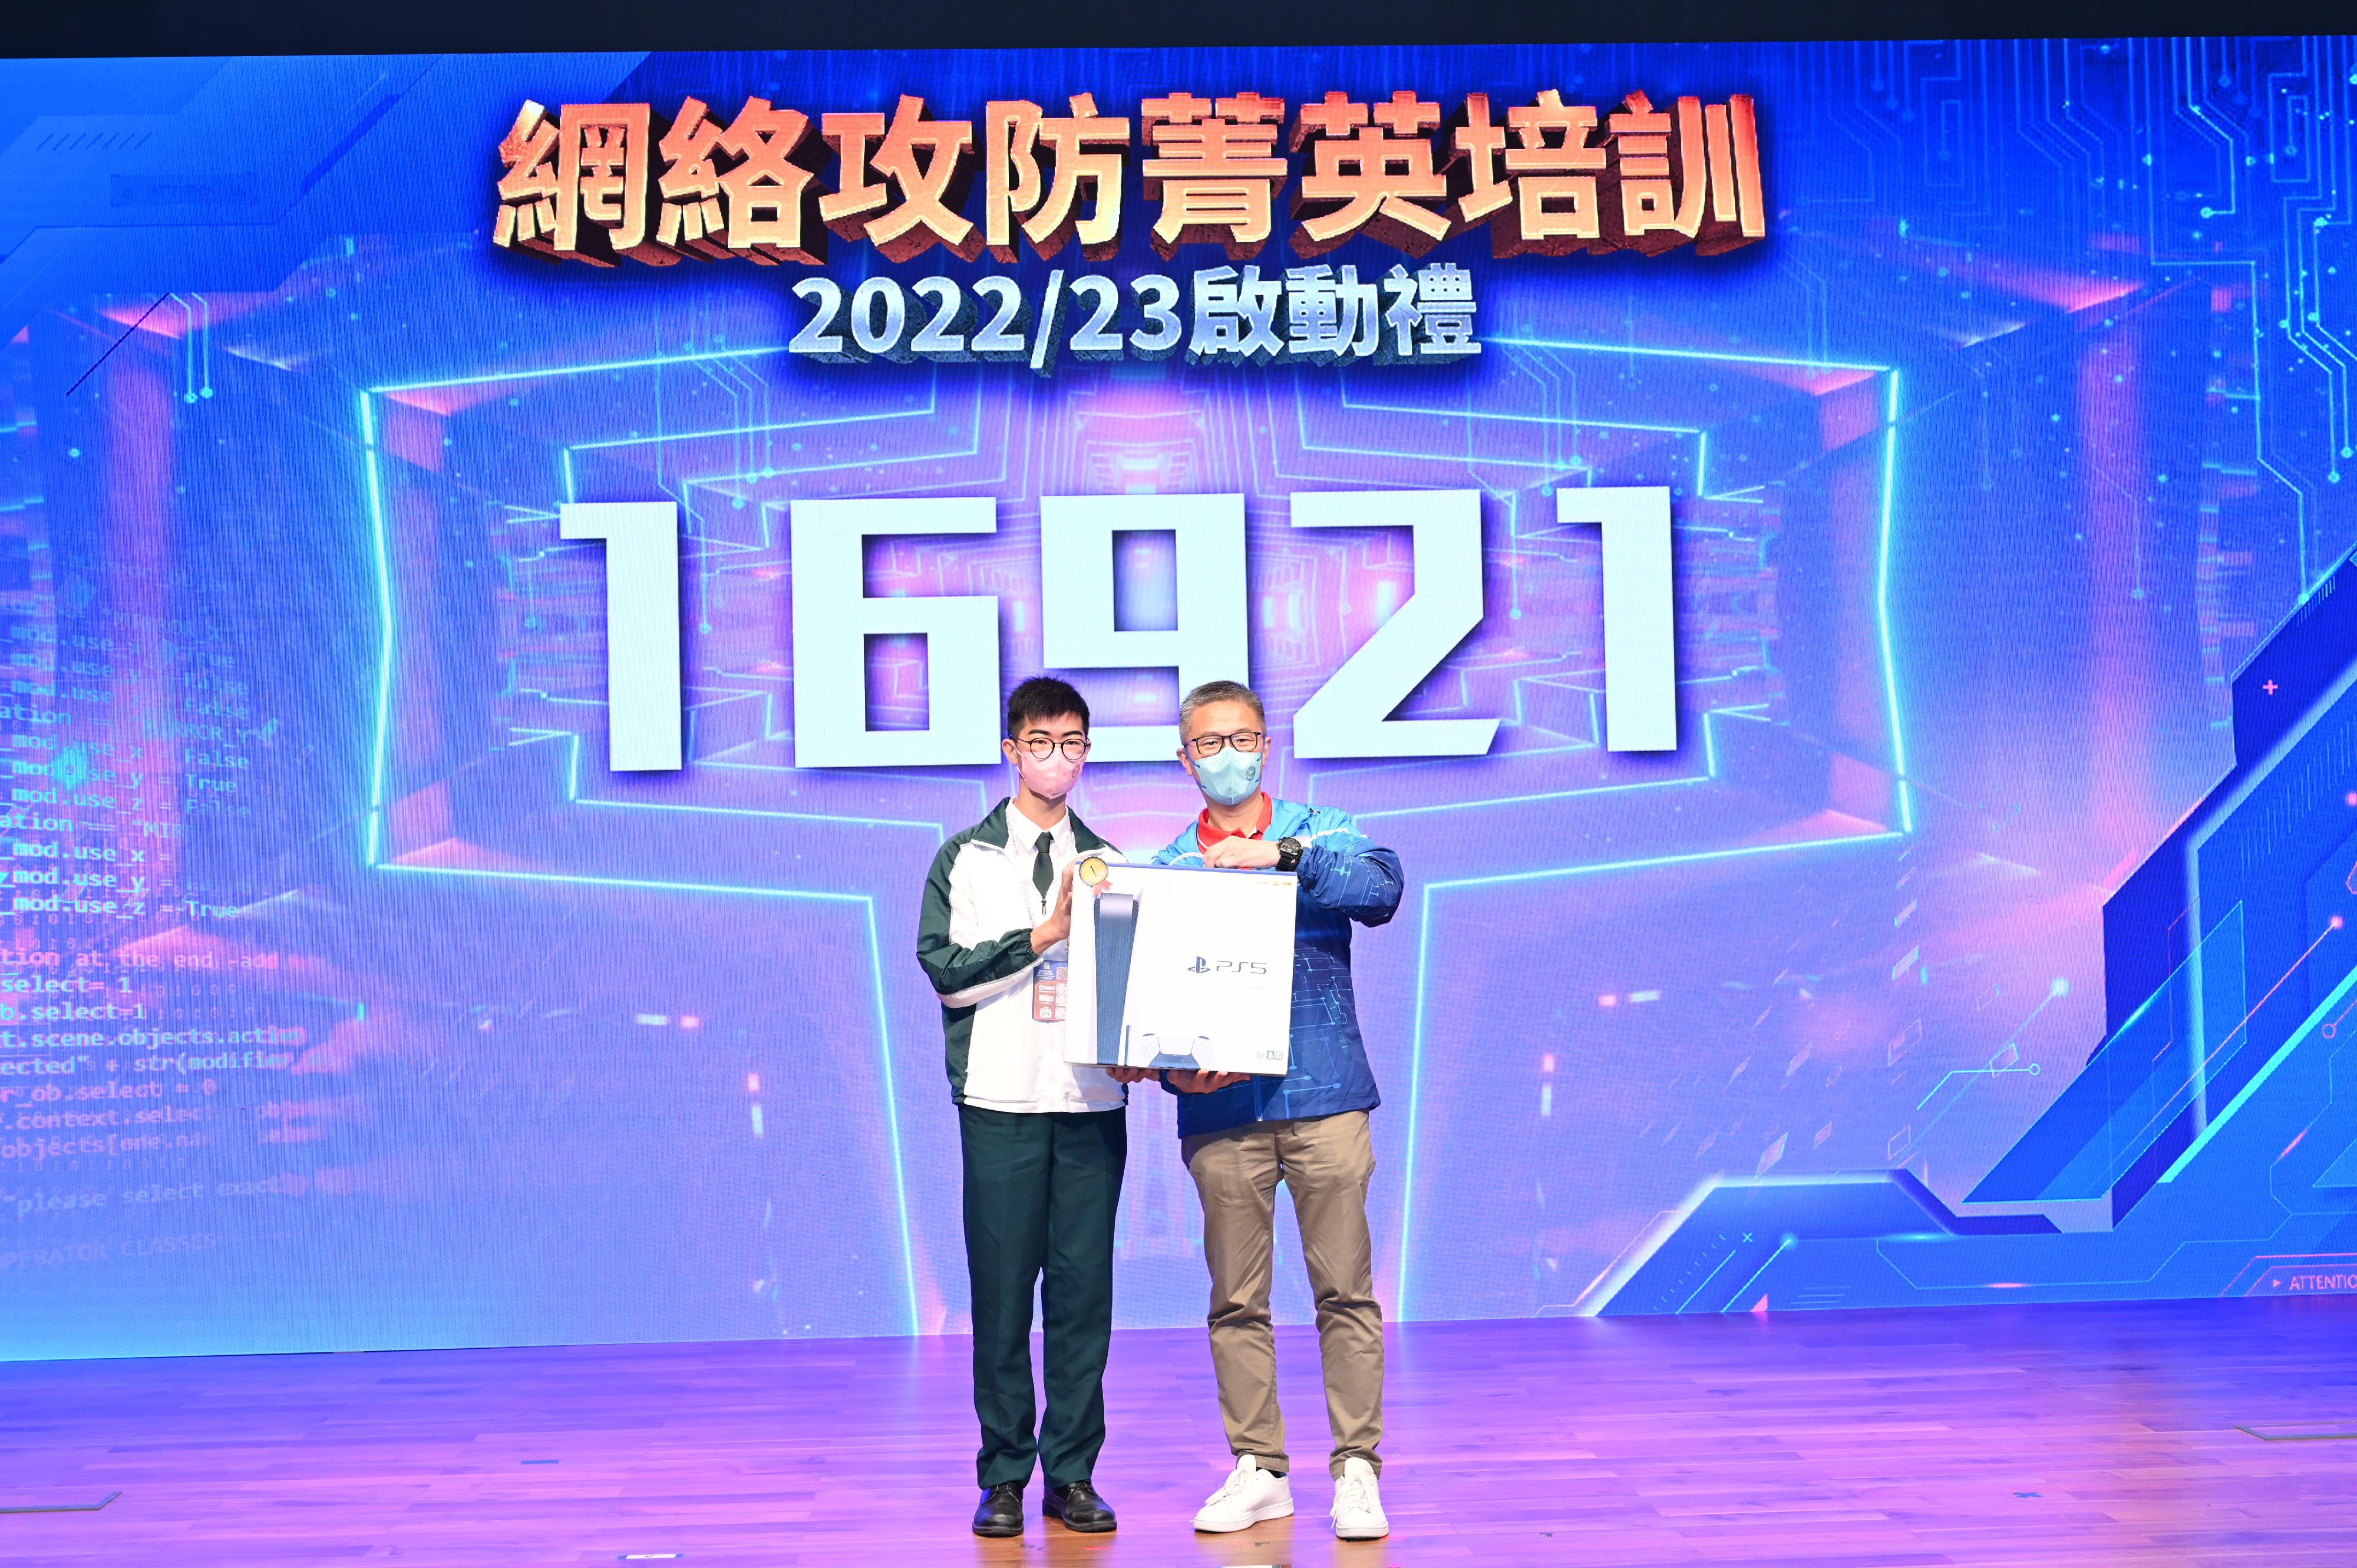 Police held the “Cyber Attack and Defence Elite Training 2022/23 - Youth Series” kick-off ceremony at the Hong Kong Metropolitan University today (December 10). Photo shows the Commissioner of Police, Mr Siu Chak-yee, presenting prizes to the winner of the quiz contest.